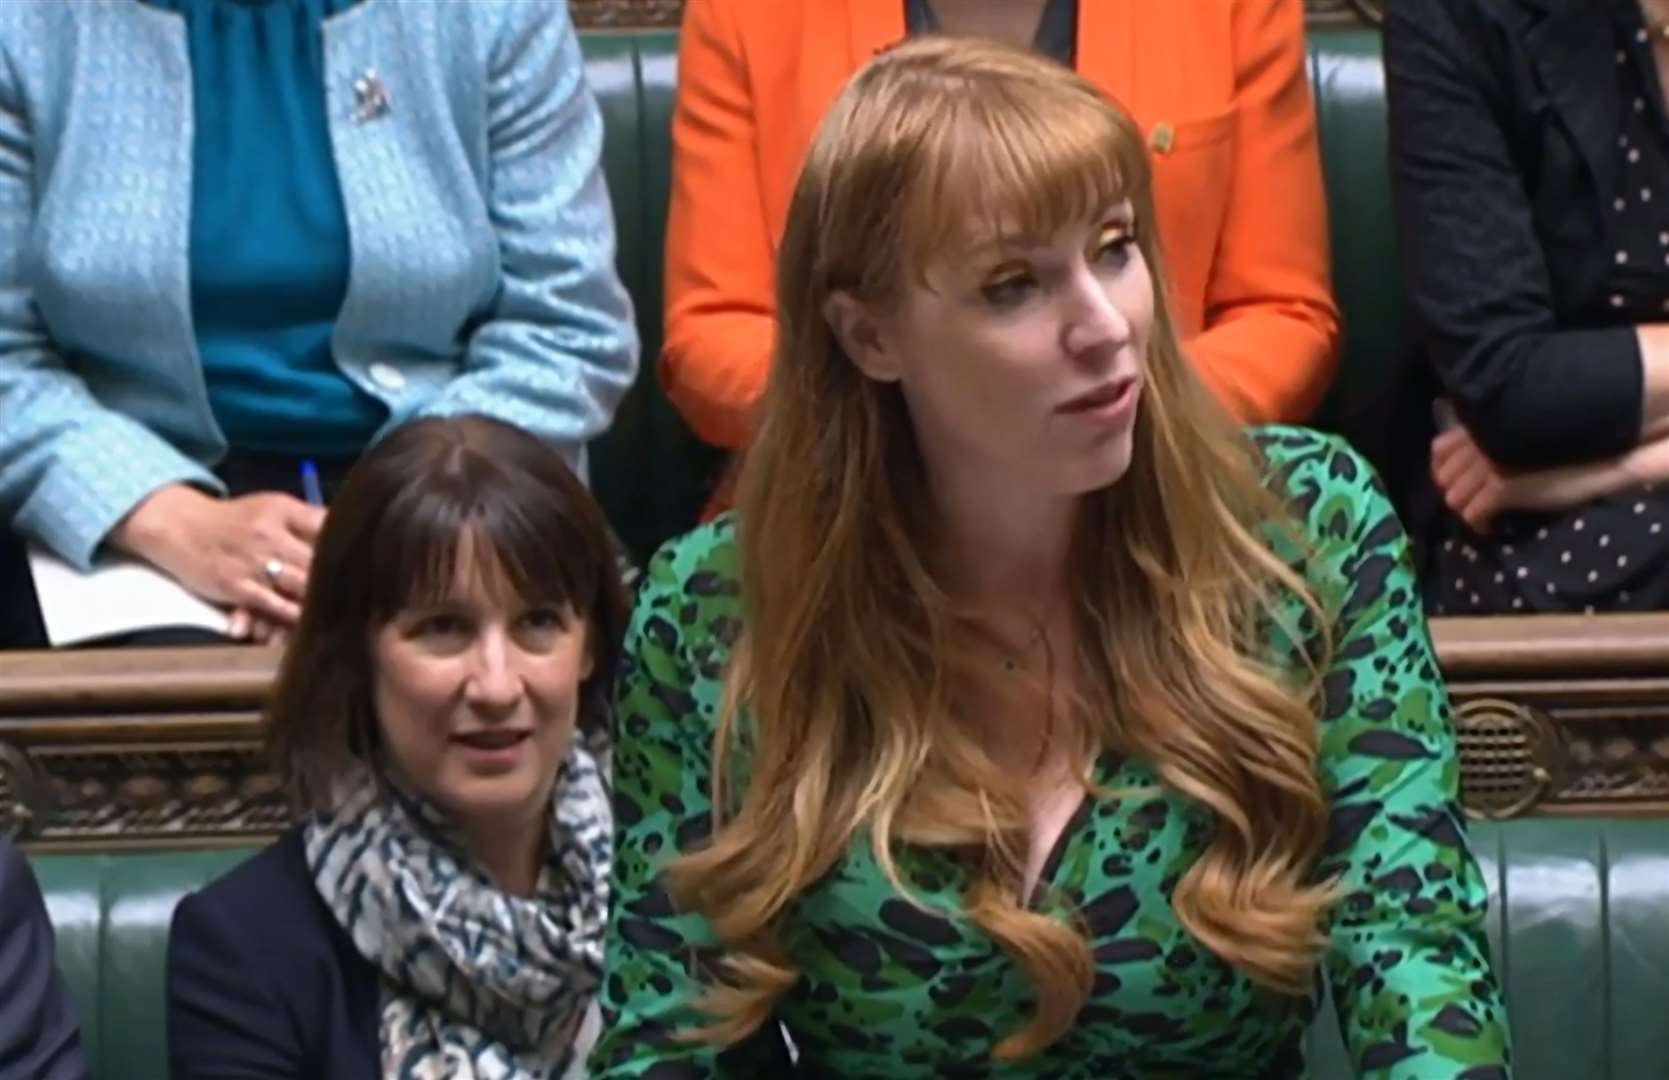 Deputy Labour Party leader Angela Rayner (House of Commons/UK Parliament/PA)